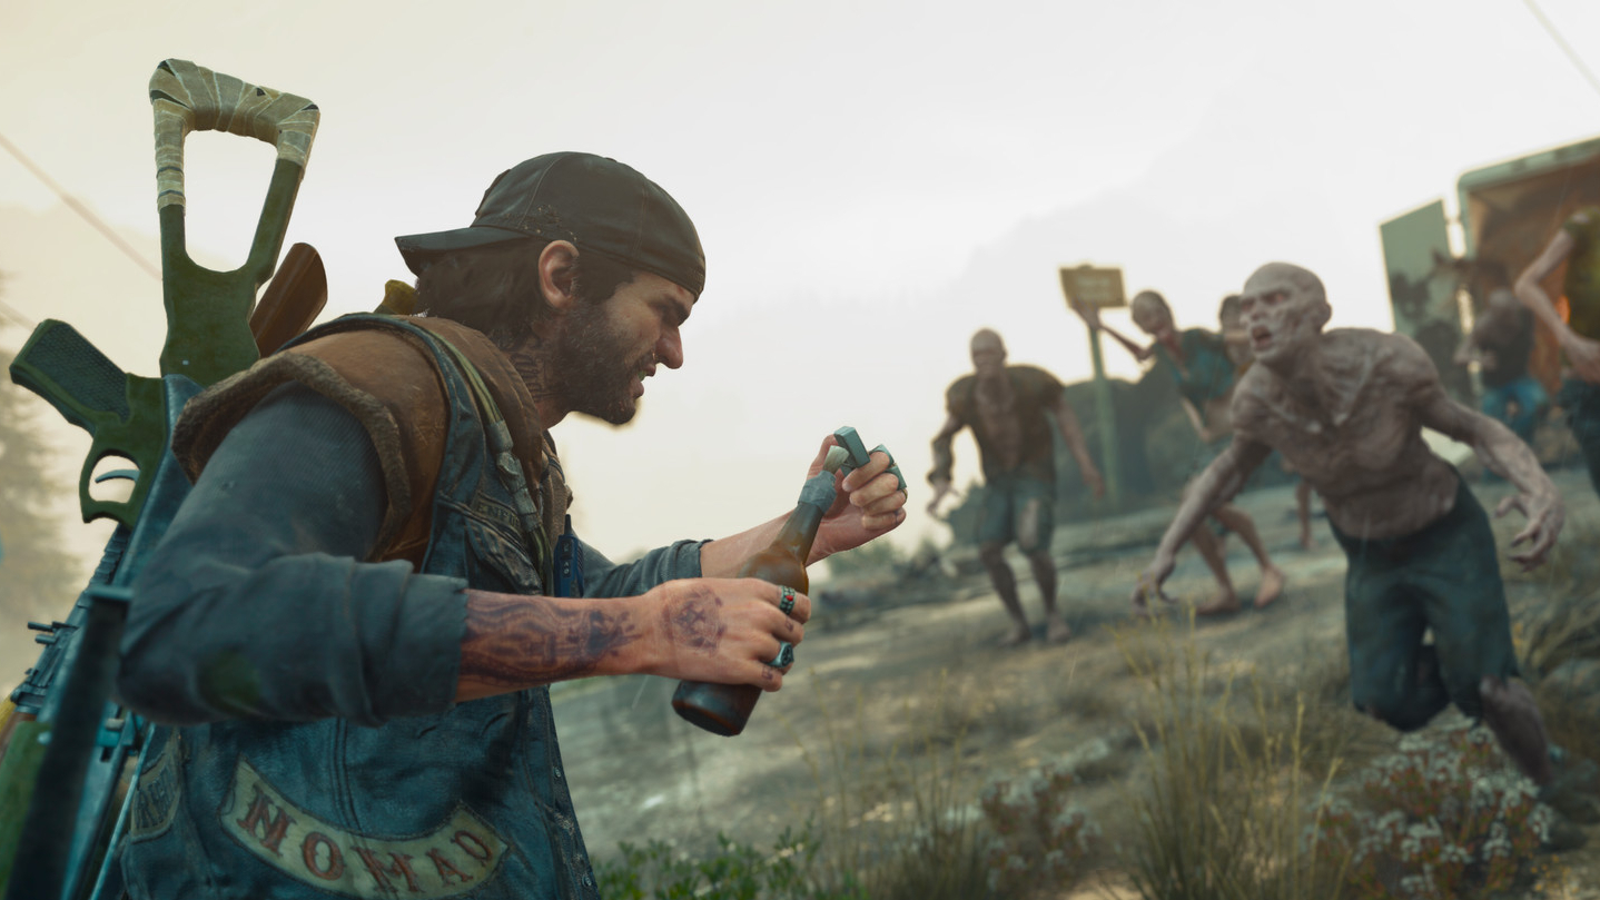 Metacritic - Days Gone (PS4) reviews are scheduled to go